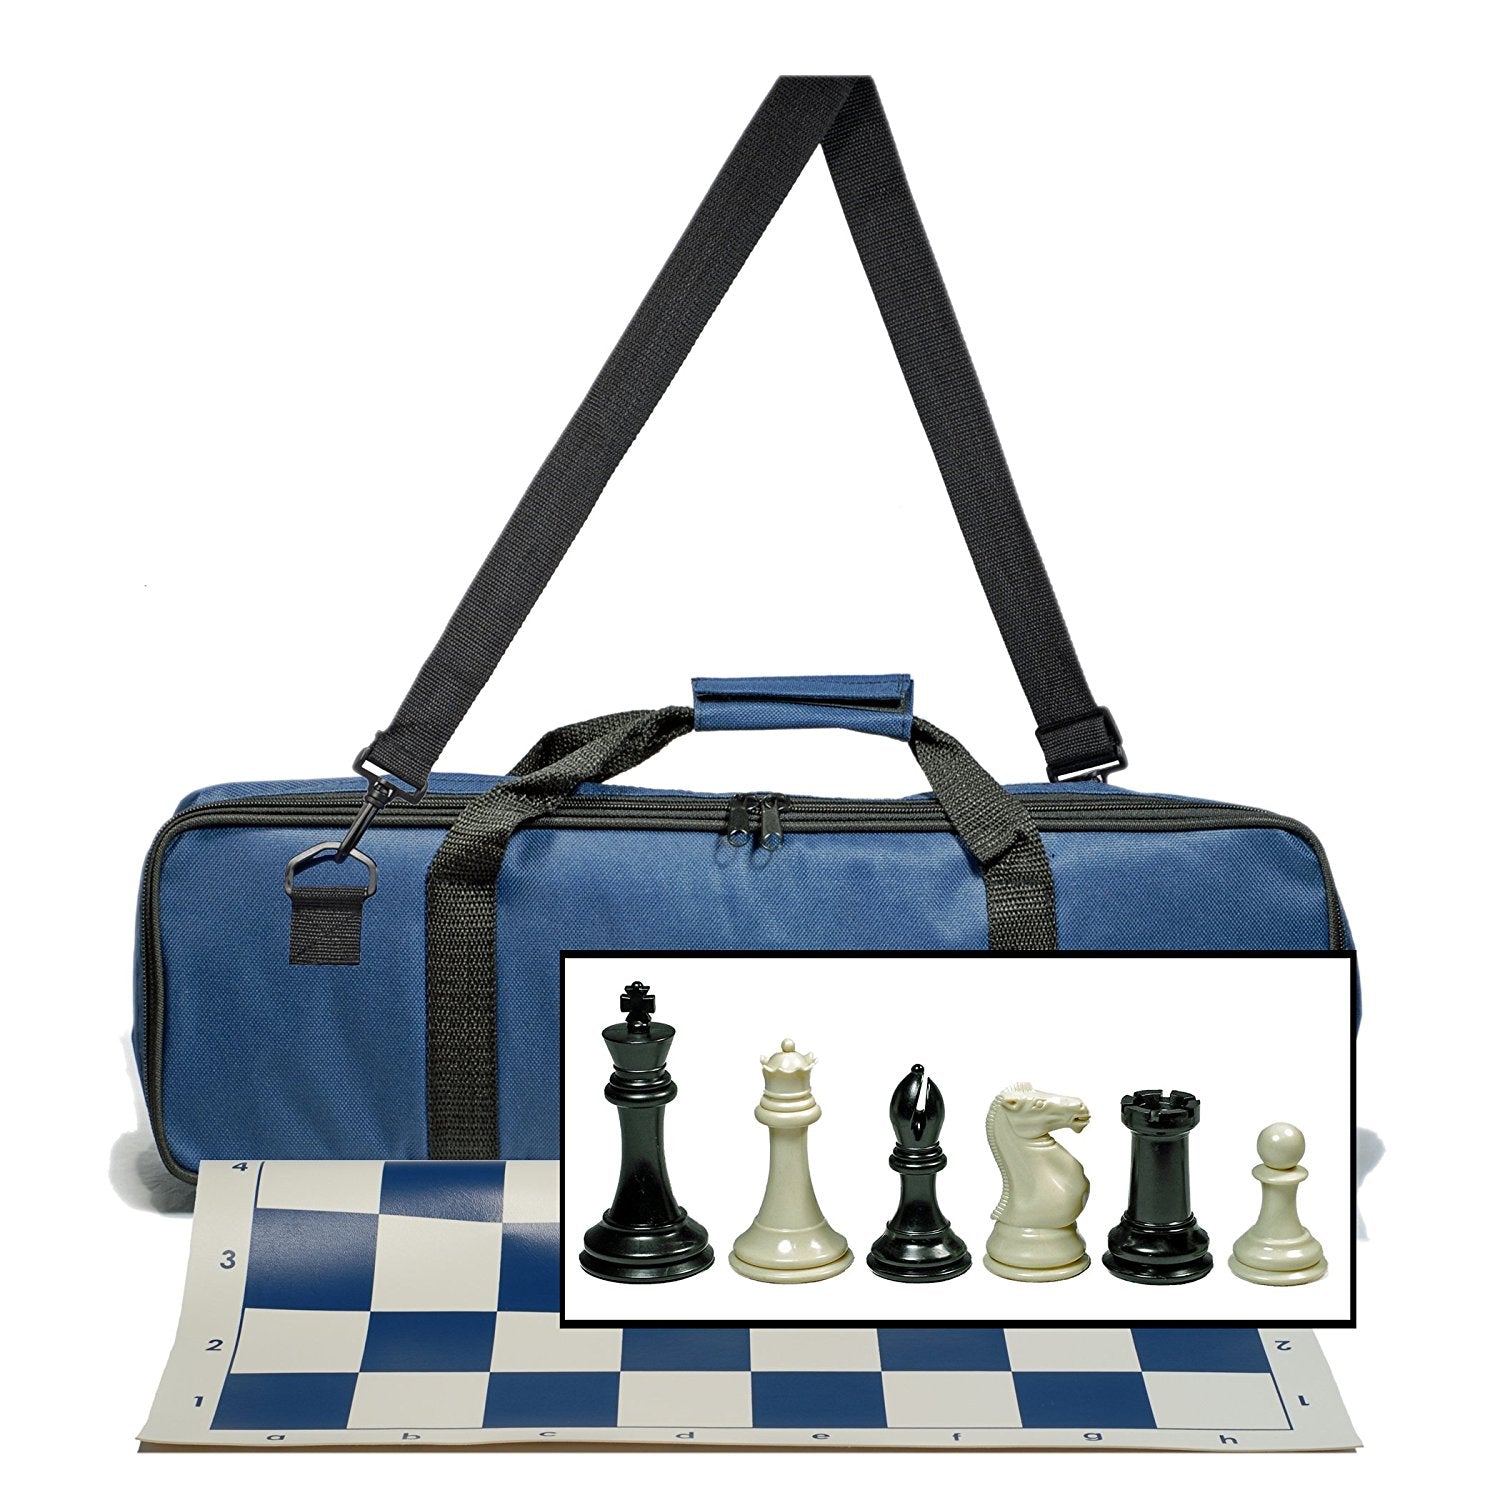 Green Belt Chess Puzzle Pack – Coach Jay's Chess Academy